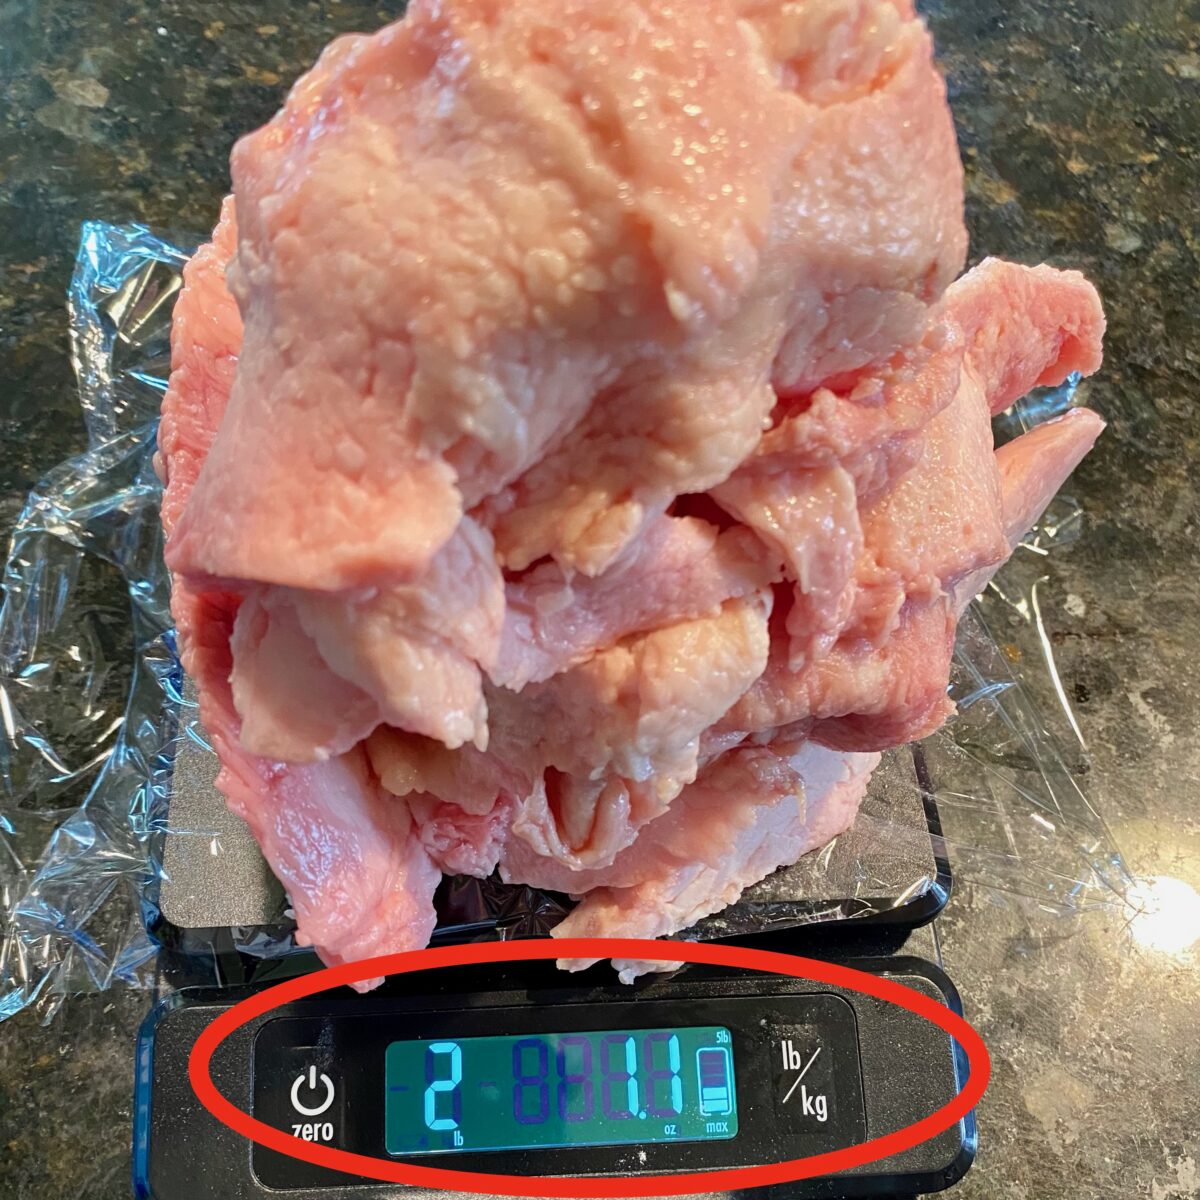 Over 2 pounds of trimmed fat placed on a scale that was removed from a brisket after prepping it.